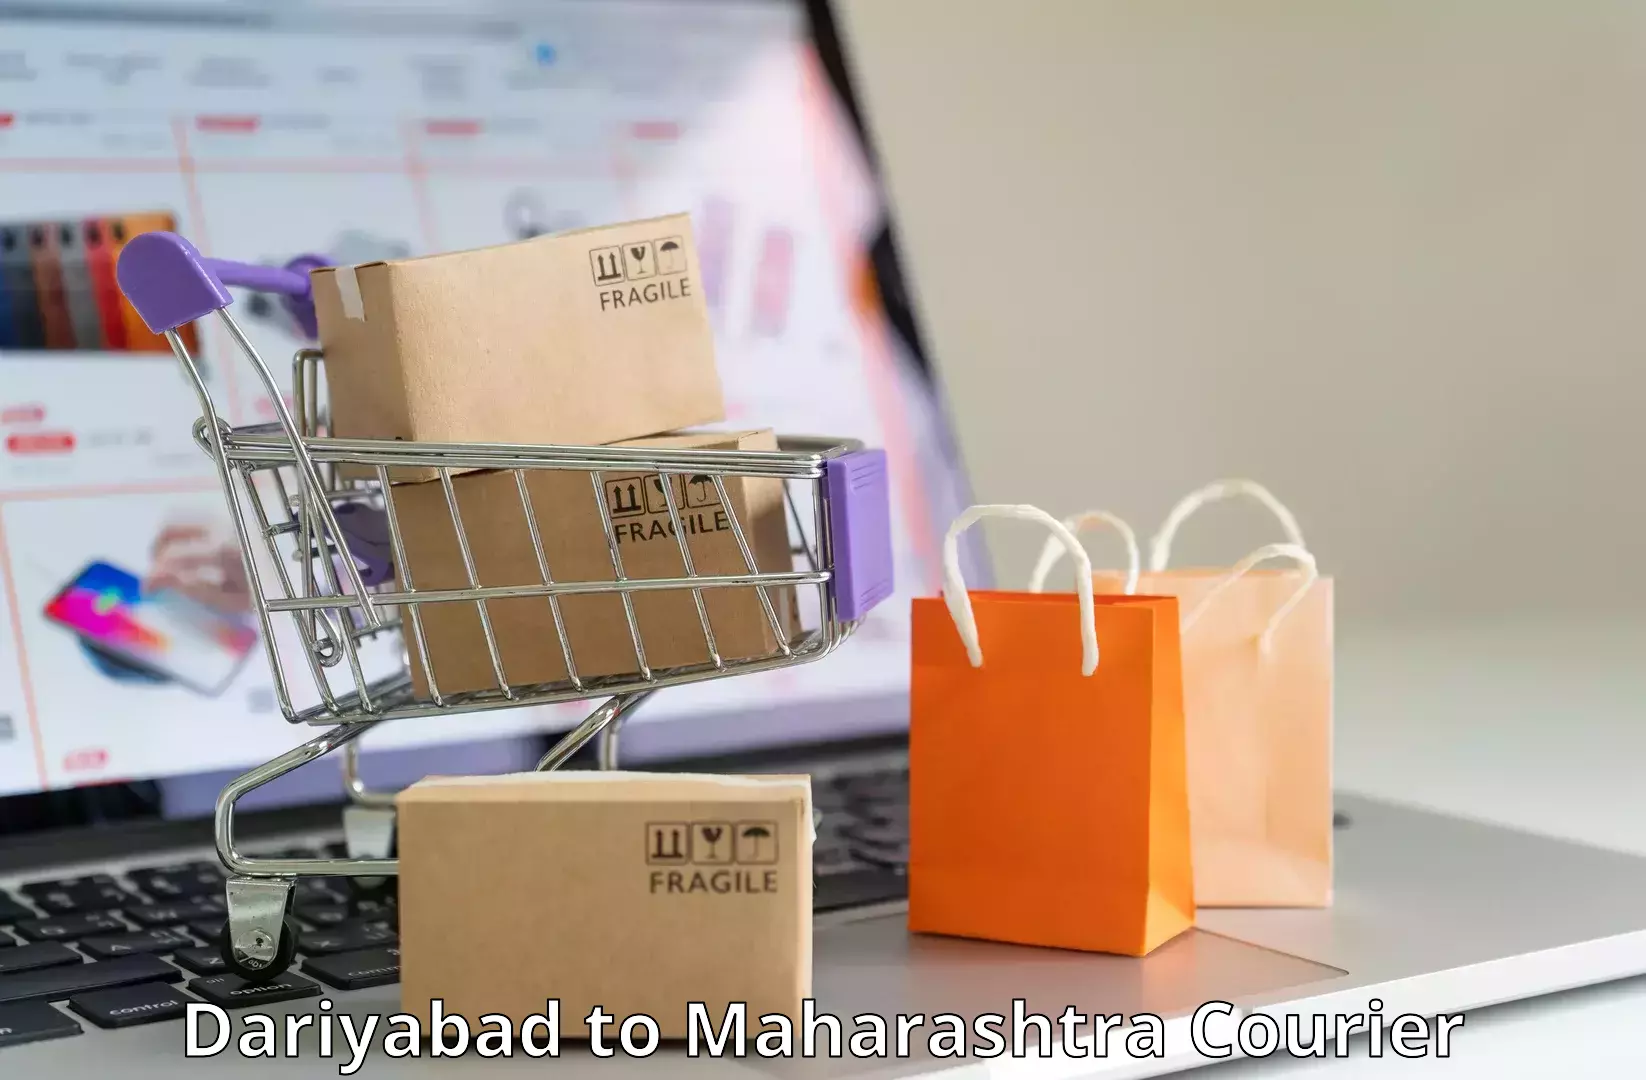 Same-day delivery solutions Dariyabad to Pachora